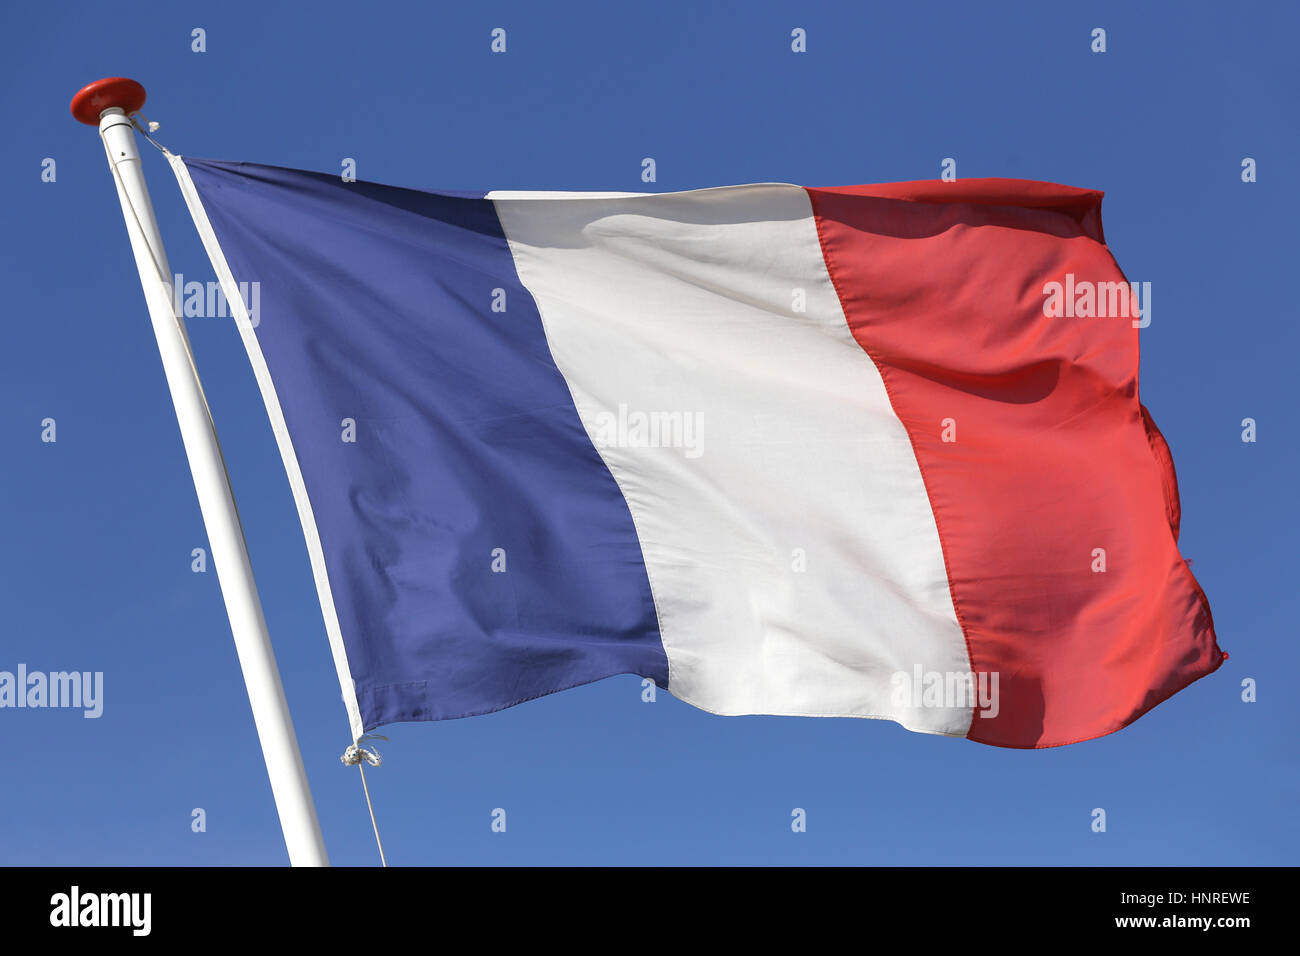 French flag flying in the wind Stock Photo